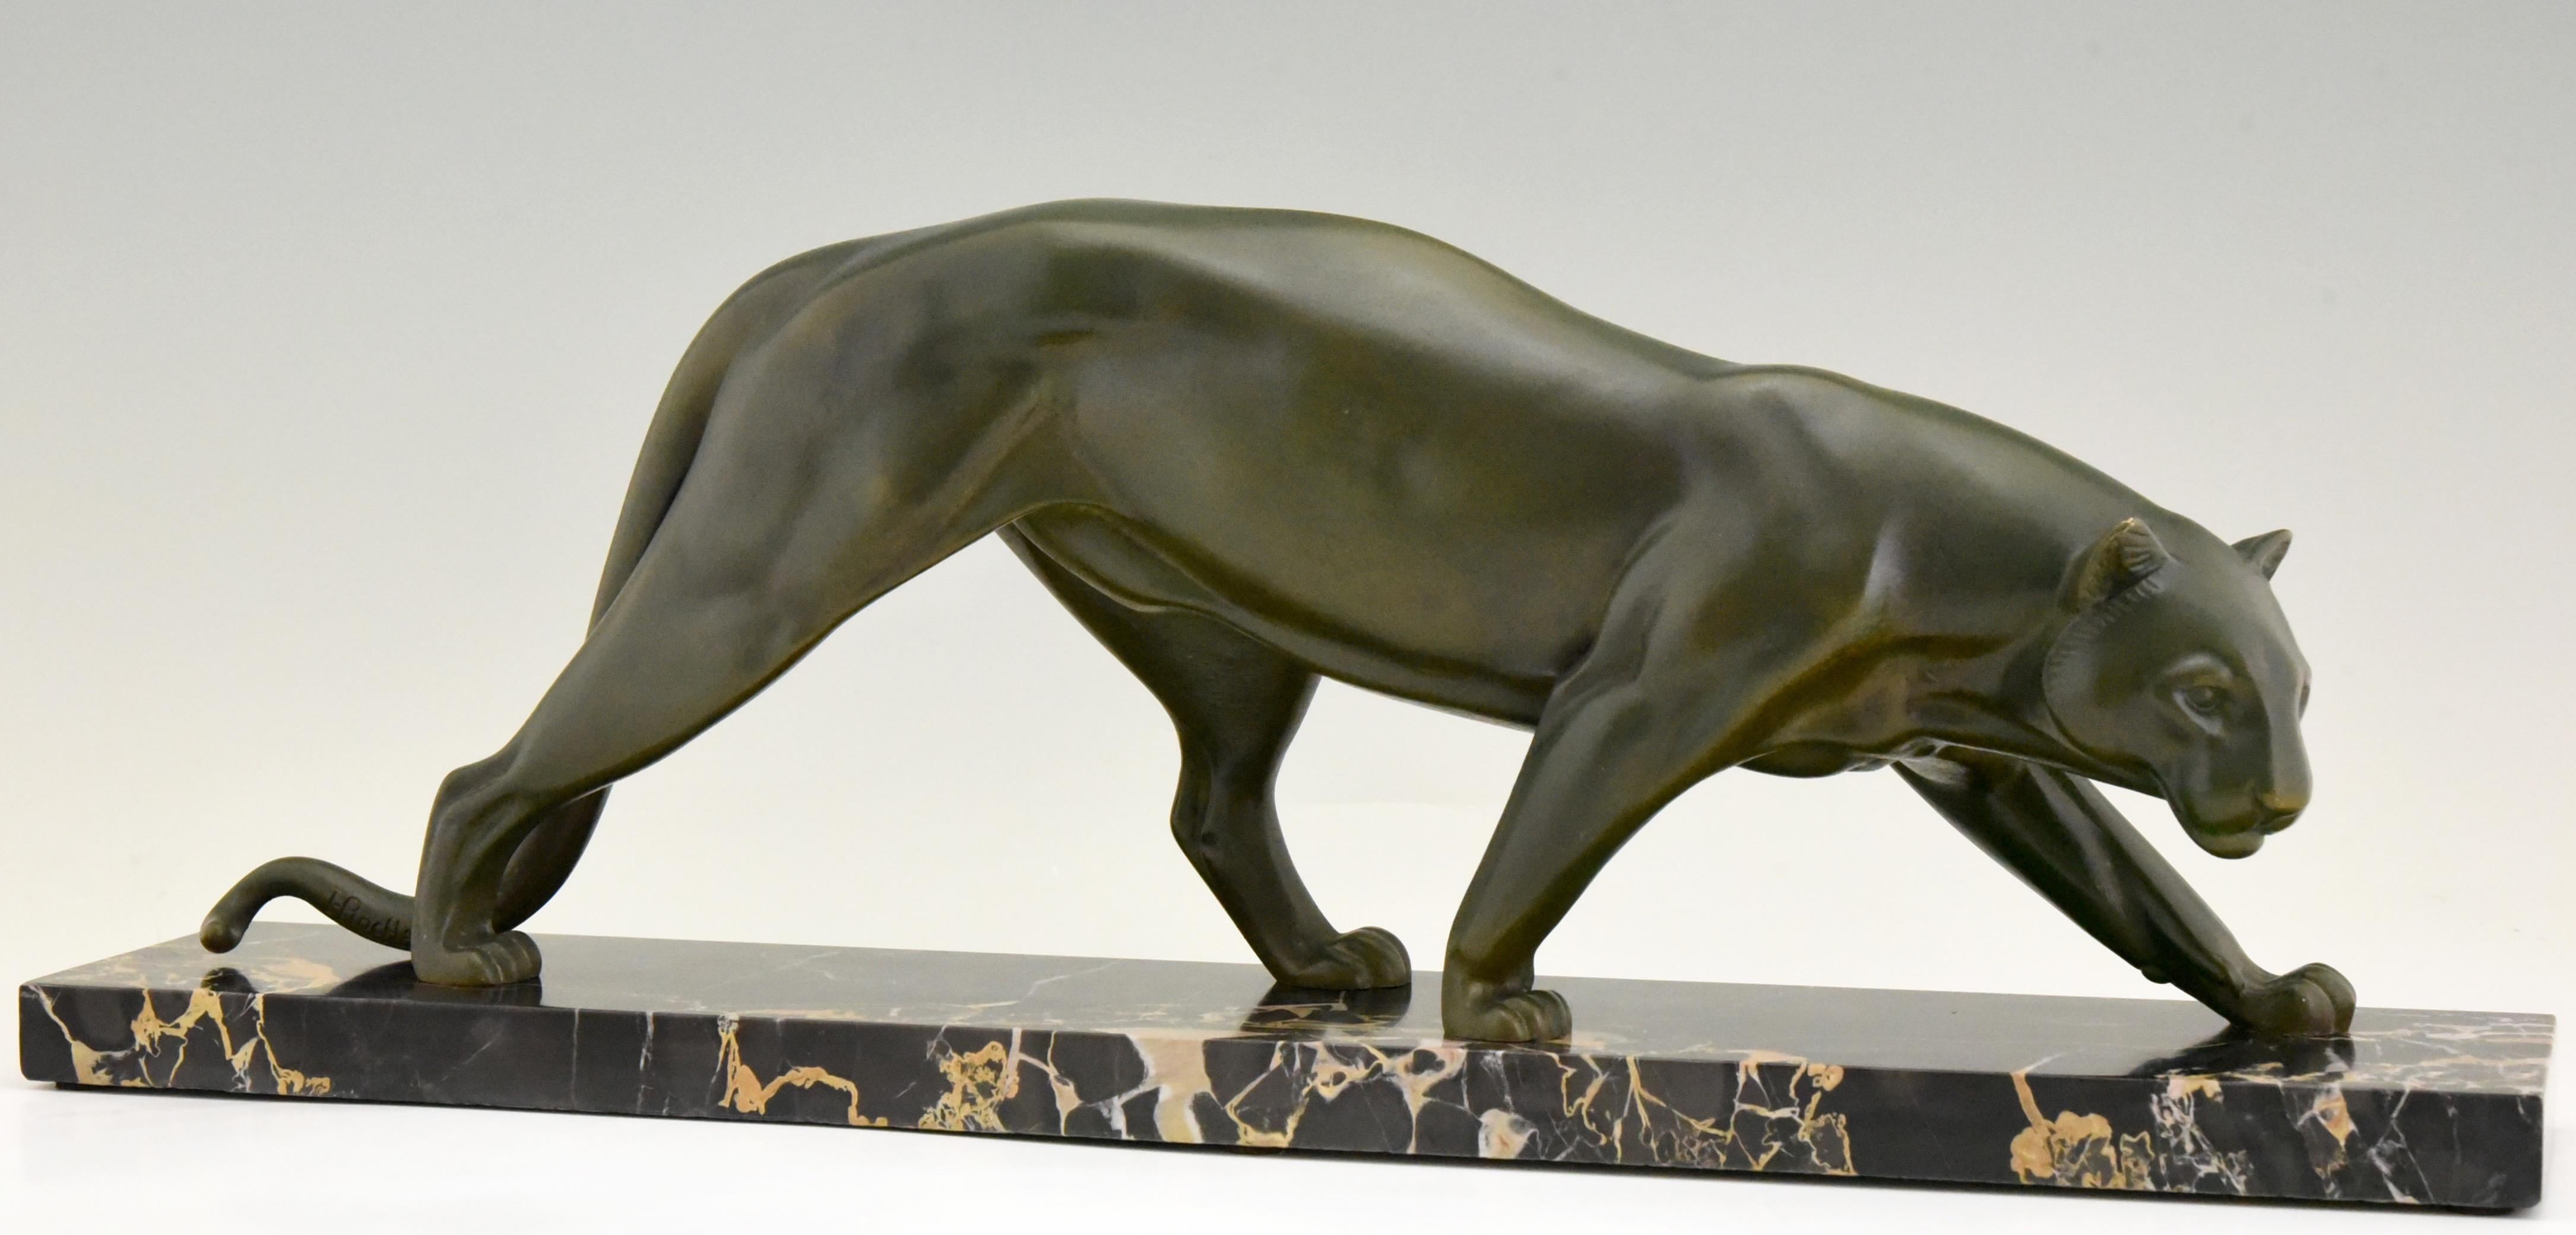 Impressive Art Deco bronze of a panther by the French artist Irenee Rochard, circa 1930. The bronze sculpture has a beautiful patina and stands on a Portor marble base.
Literature:
Animals in bronze by Christopher Payne. Antique collectors club.